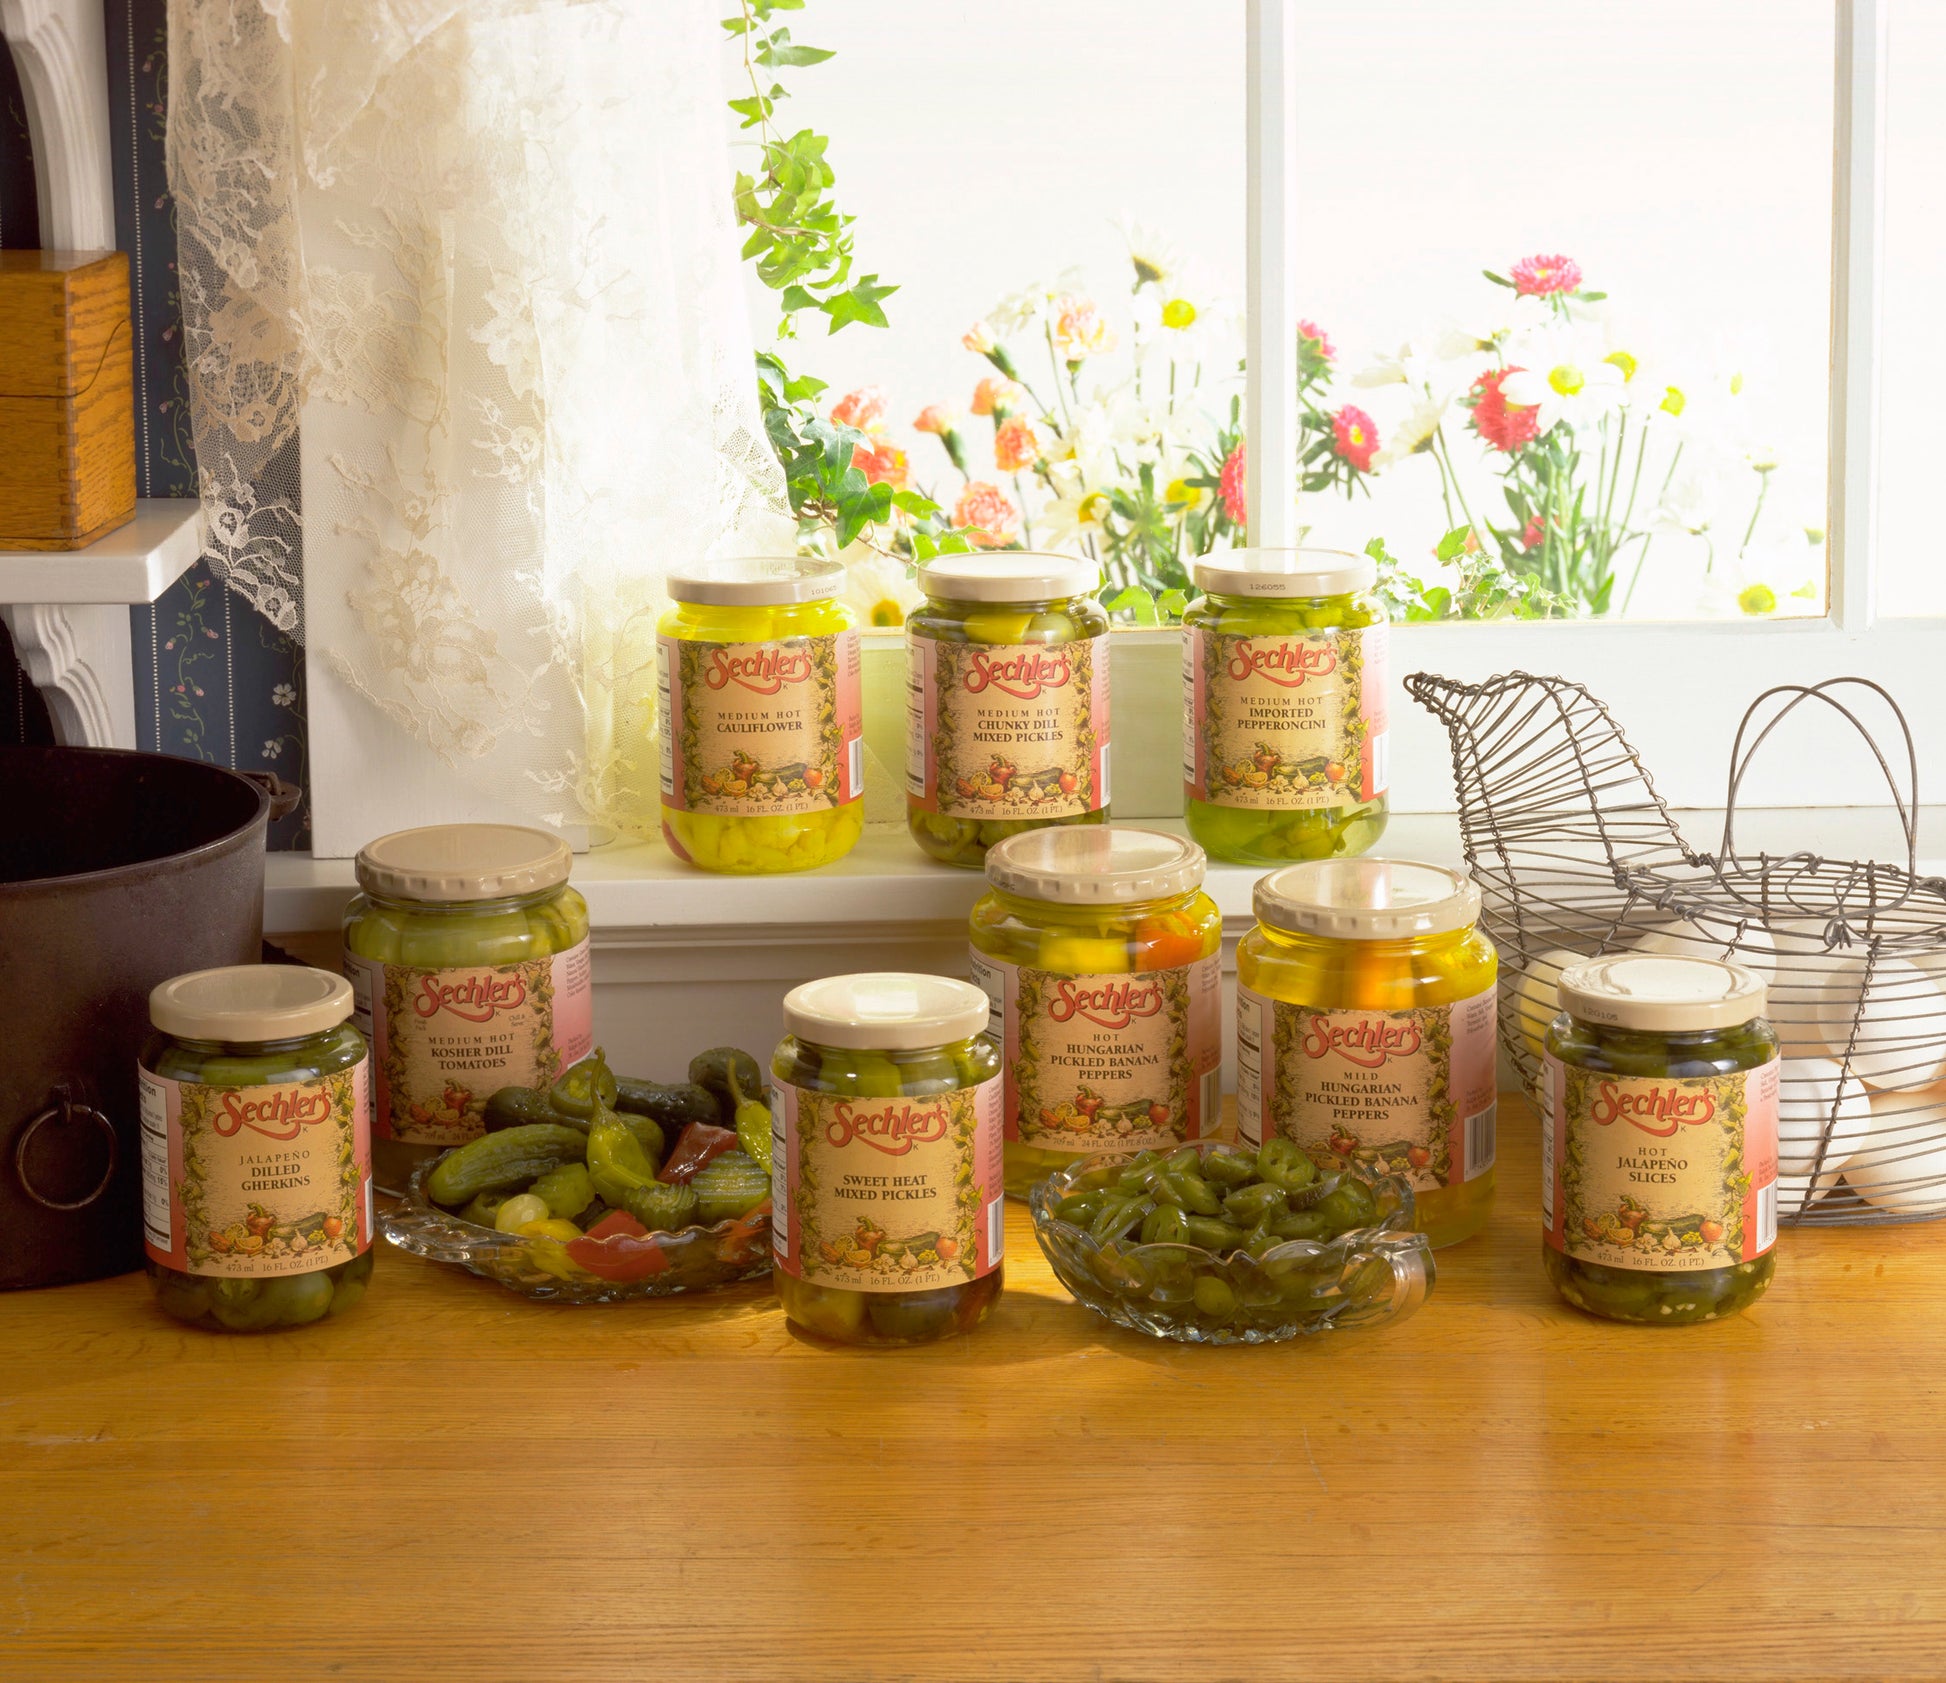 various sechler's pickles products on kitchen countertop